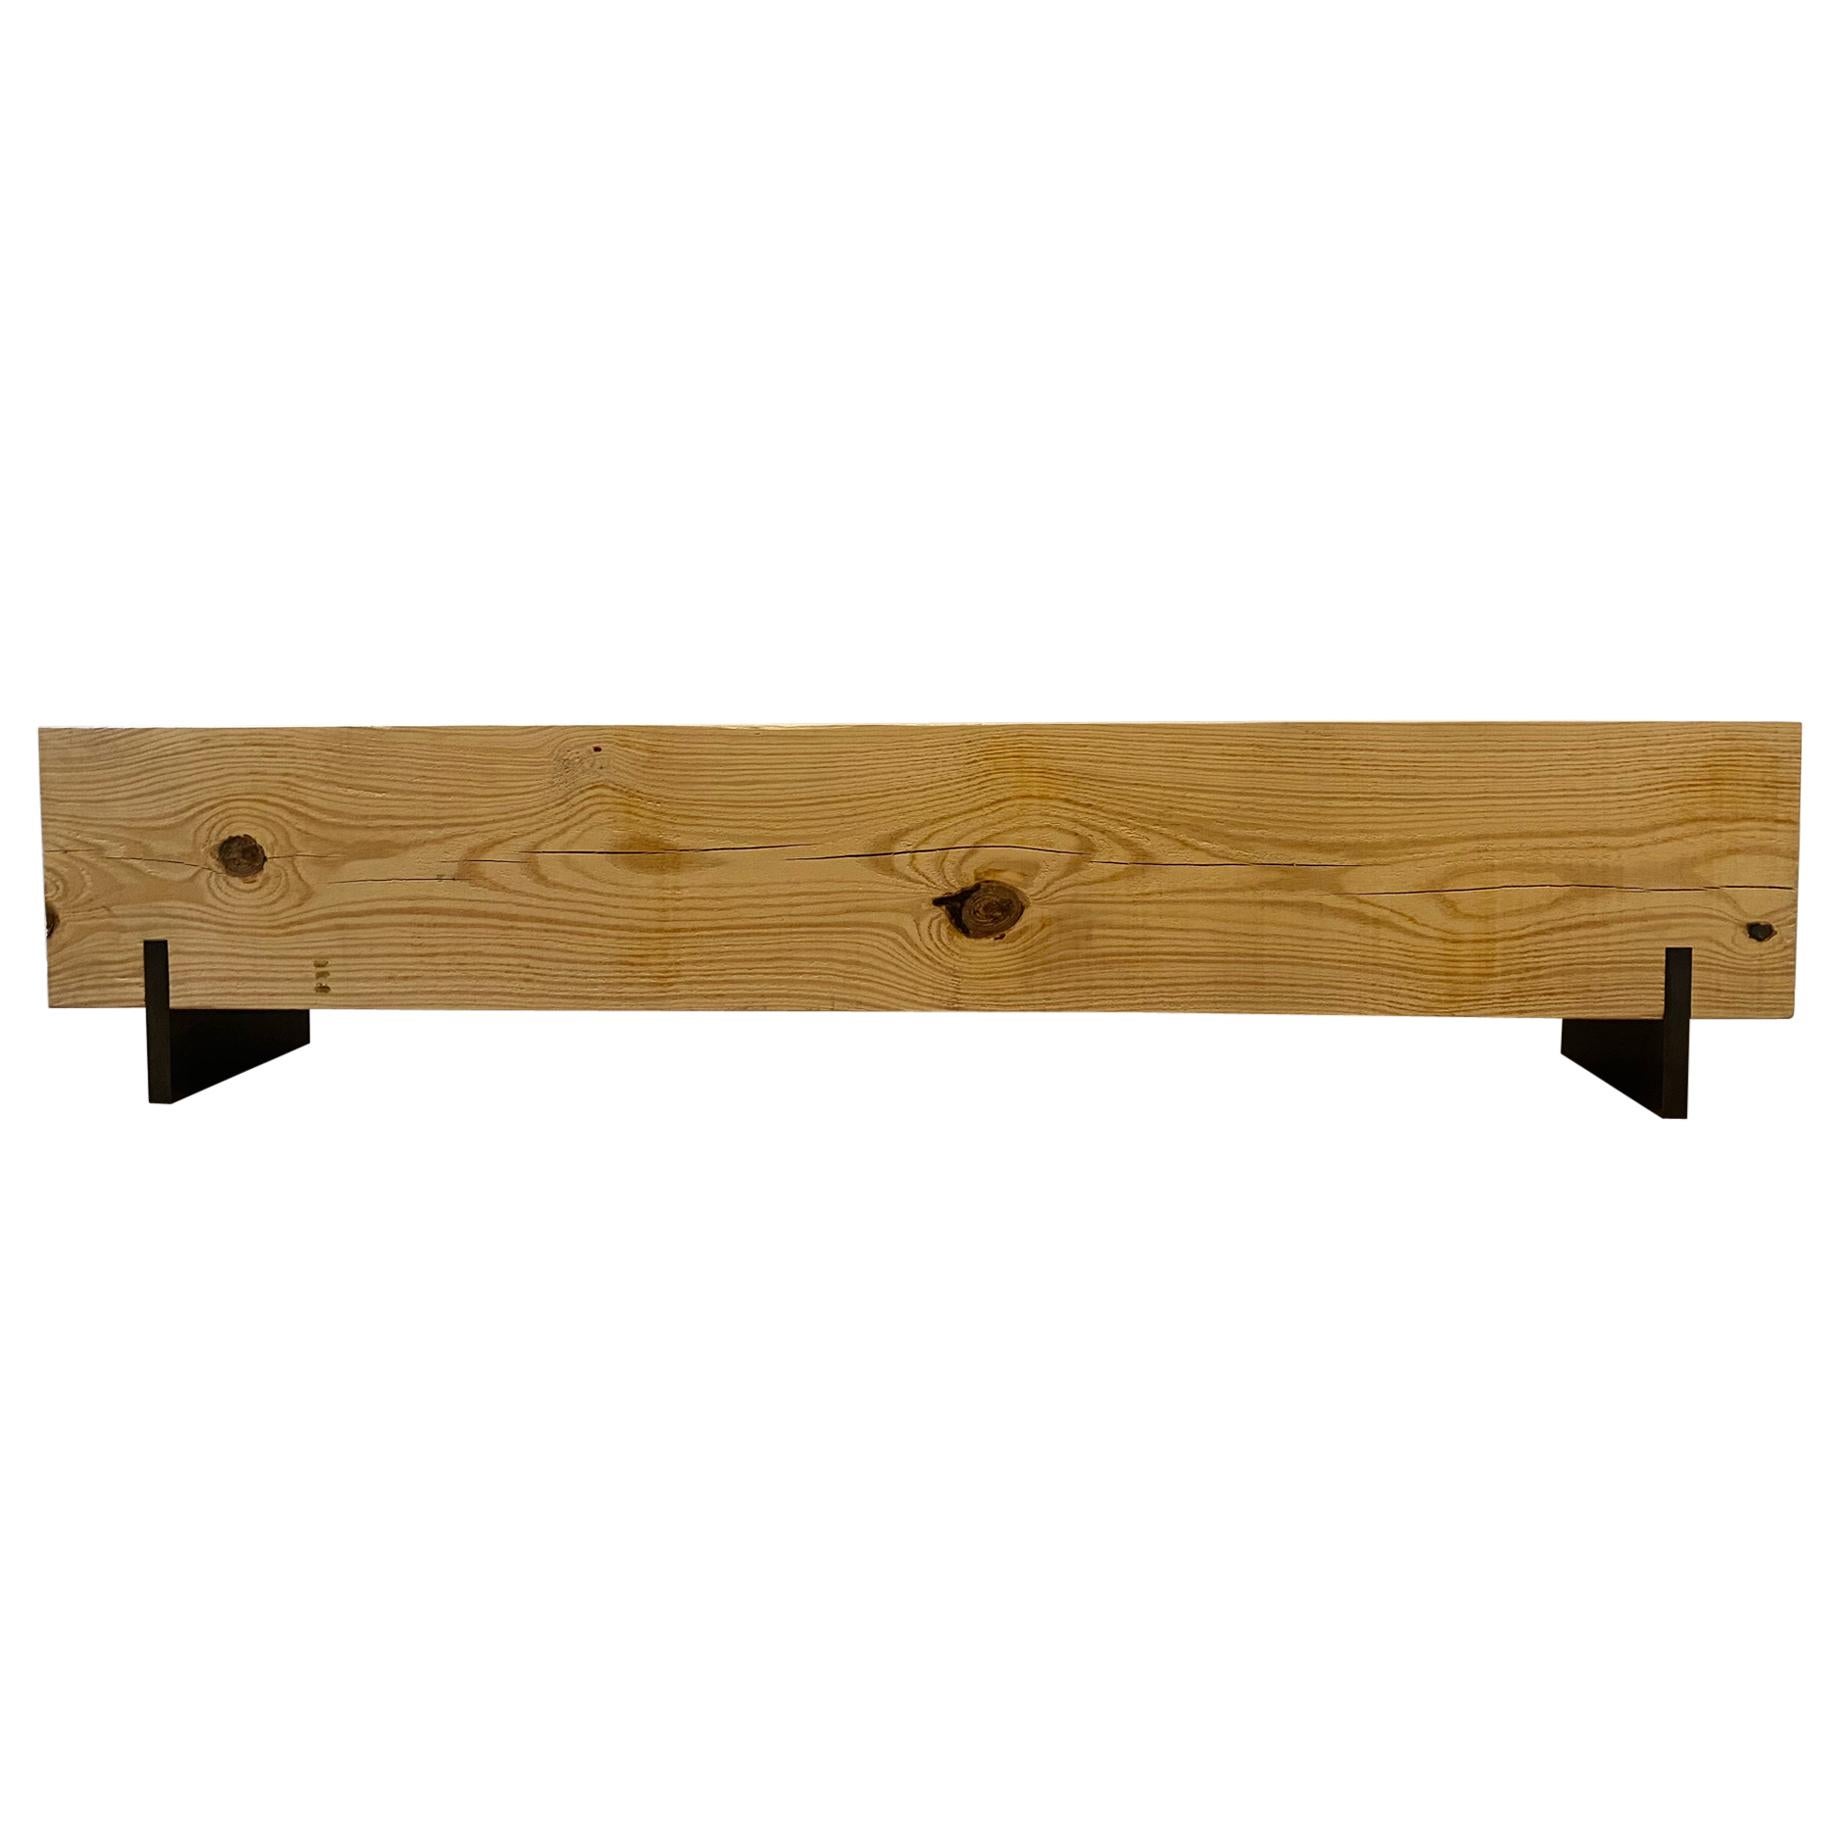 Rustic Large Reclaimed Wood Bench Pine and Steel 6'